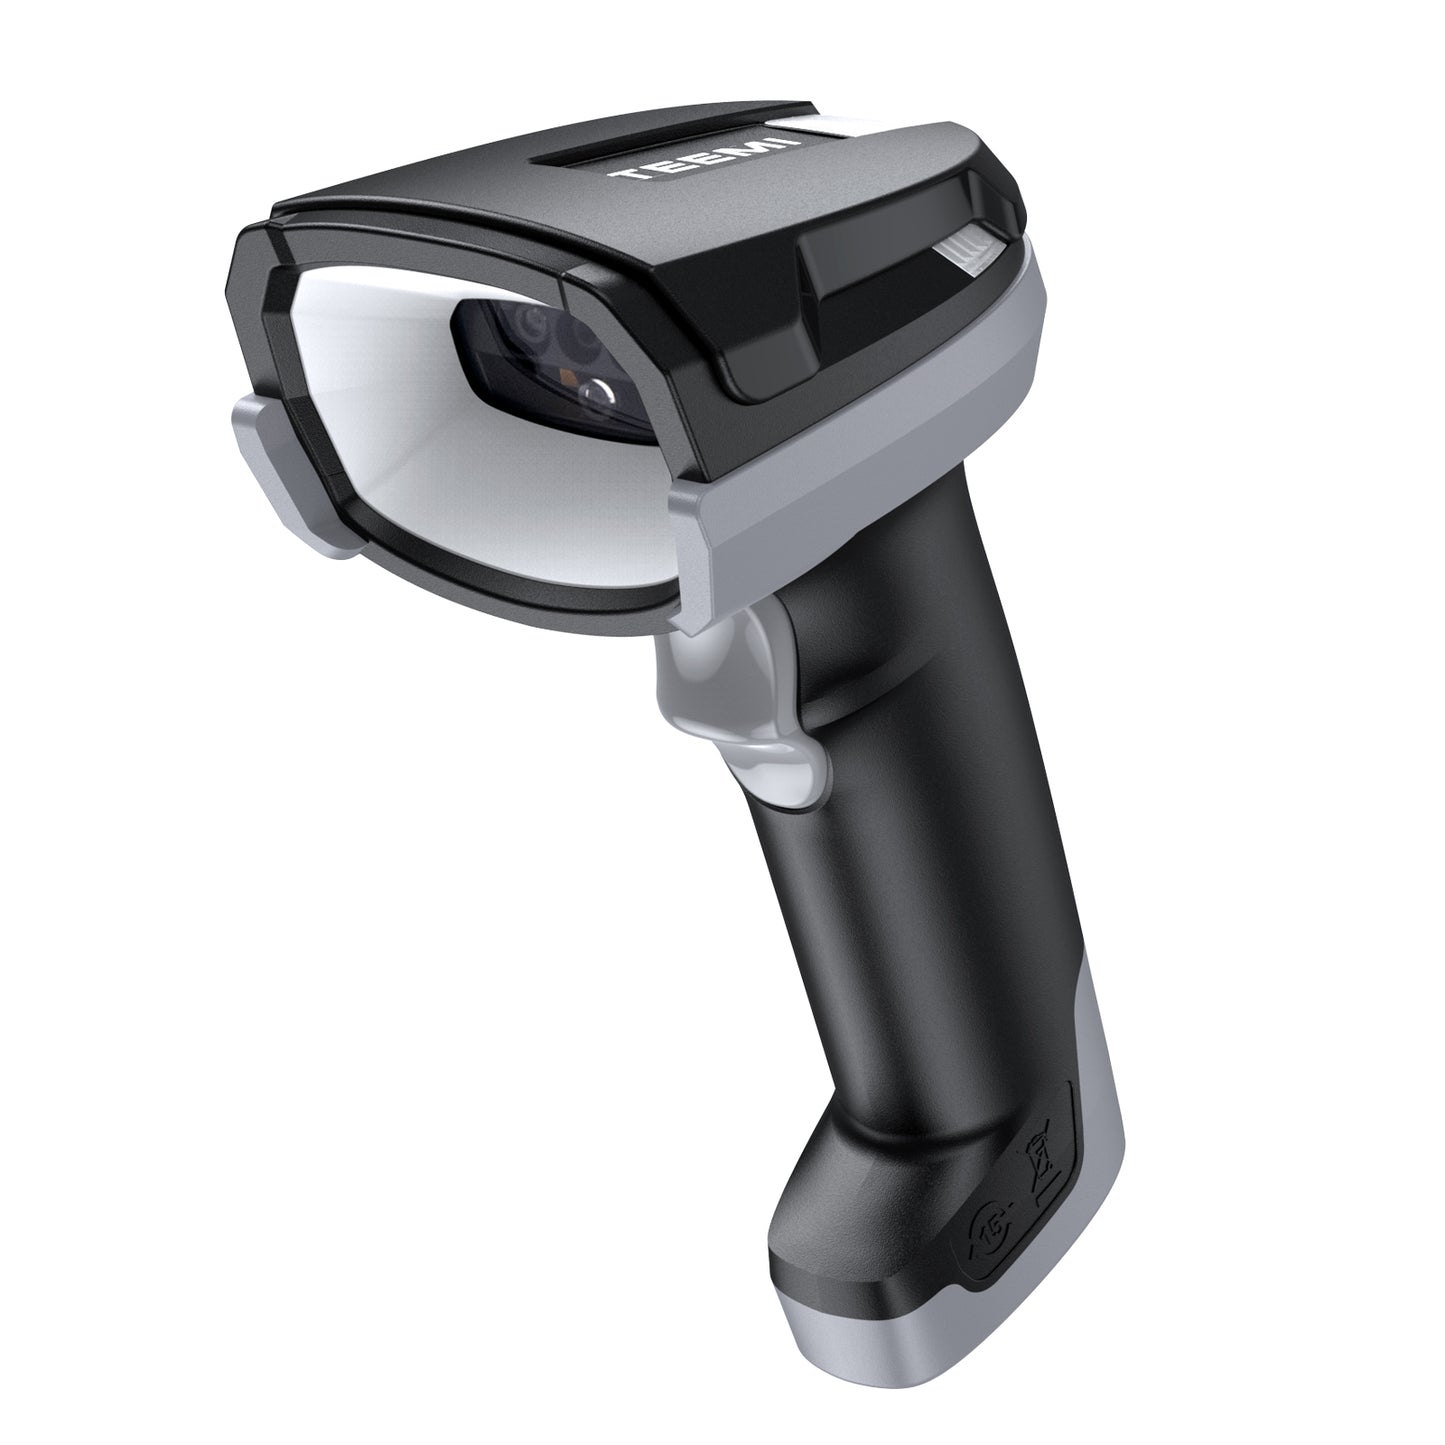 TEEMI TMSL-59CR 1D 2D Bluetooth Barcode Scanner with USB Cradle and One Spare Battery, High-Resolution Megapixel Sensor Industrial Rugged Design, Vibration, Powerful Data Parsing